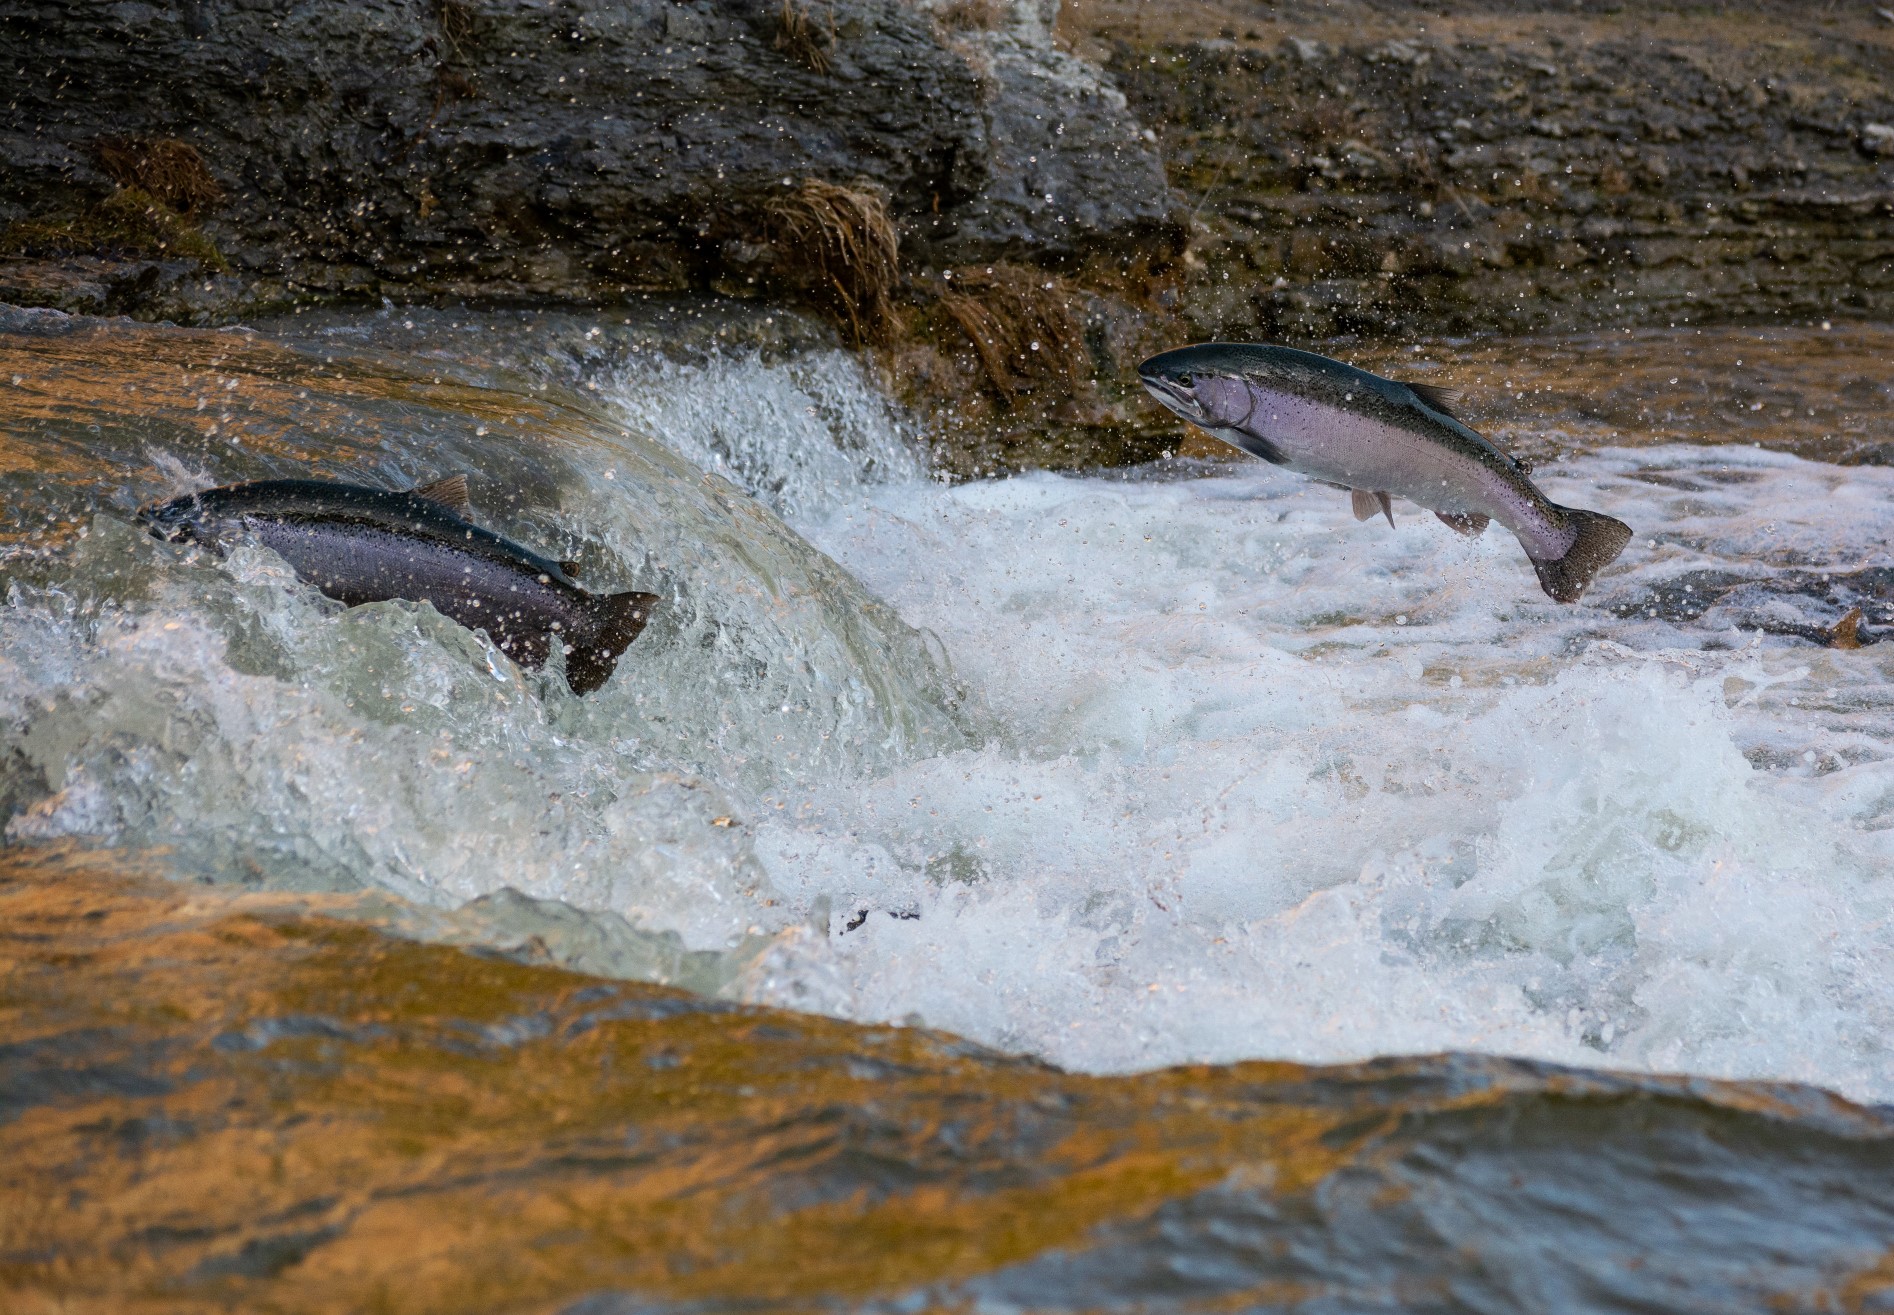 Two salmon leaping upriver